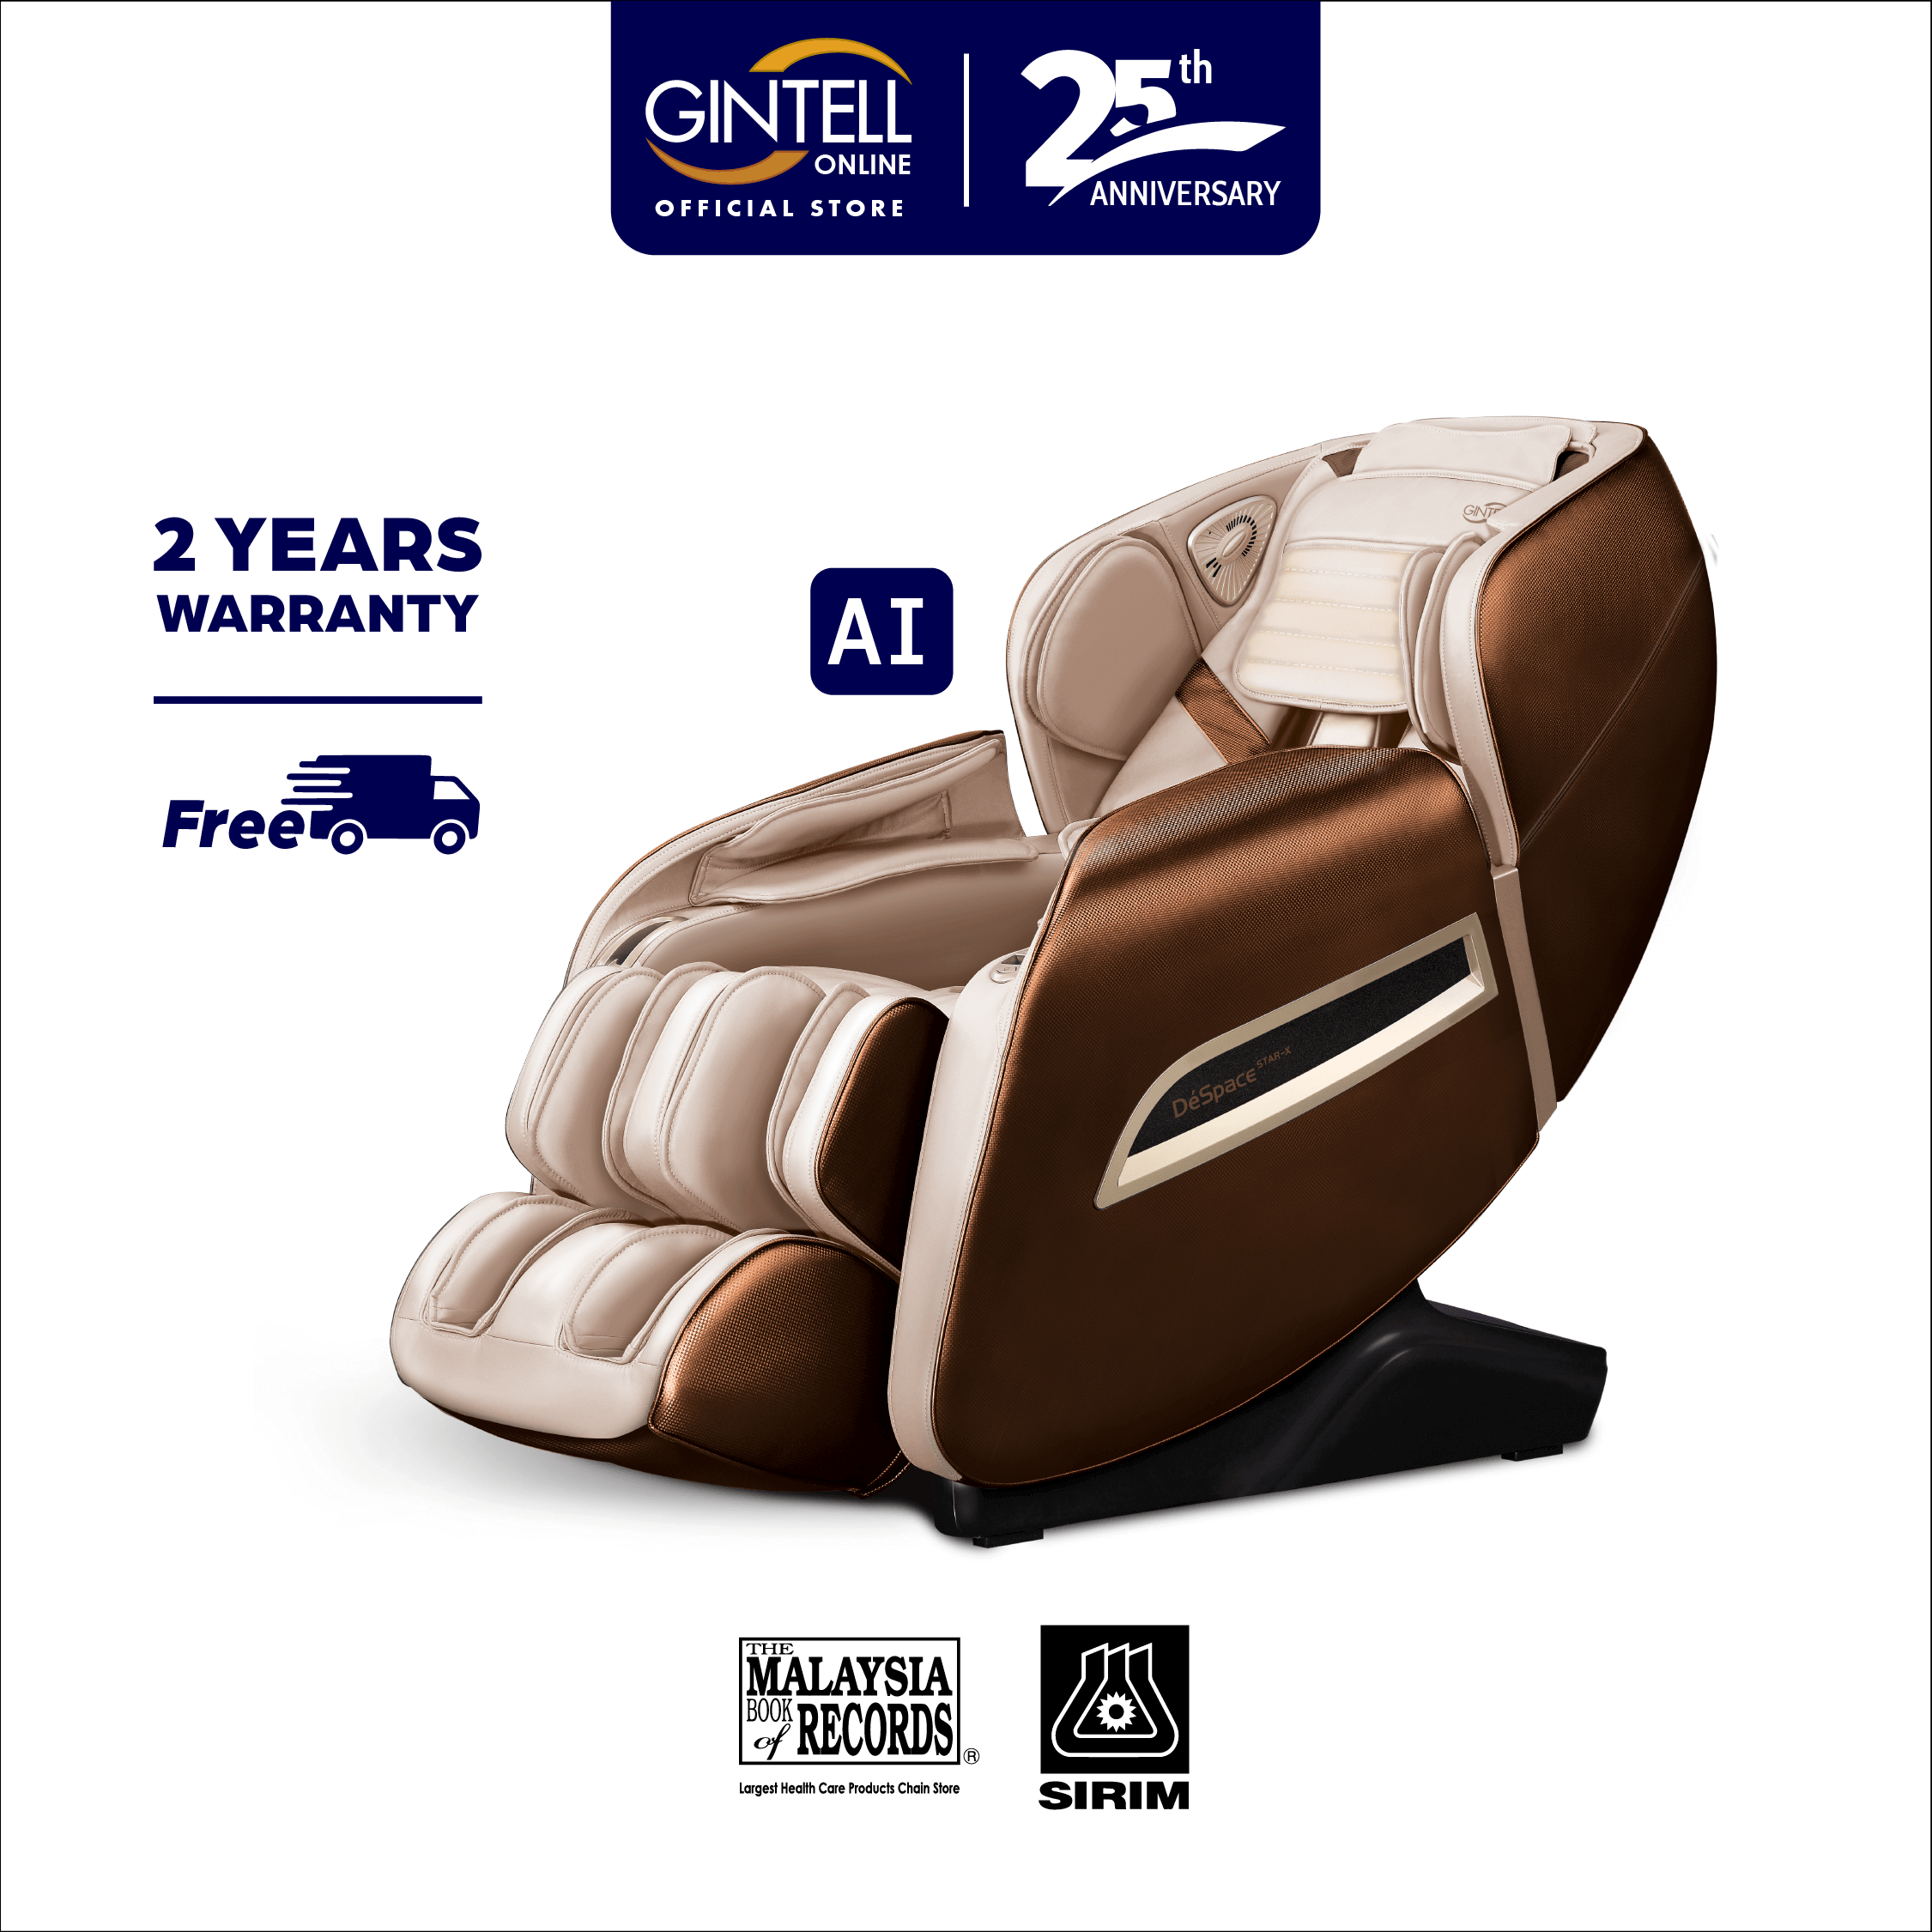 [FREE Shipping] GINTELL DSpace Star-X Massage Chair